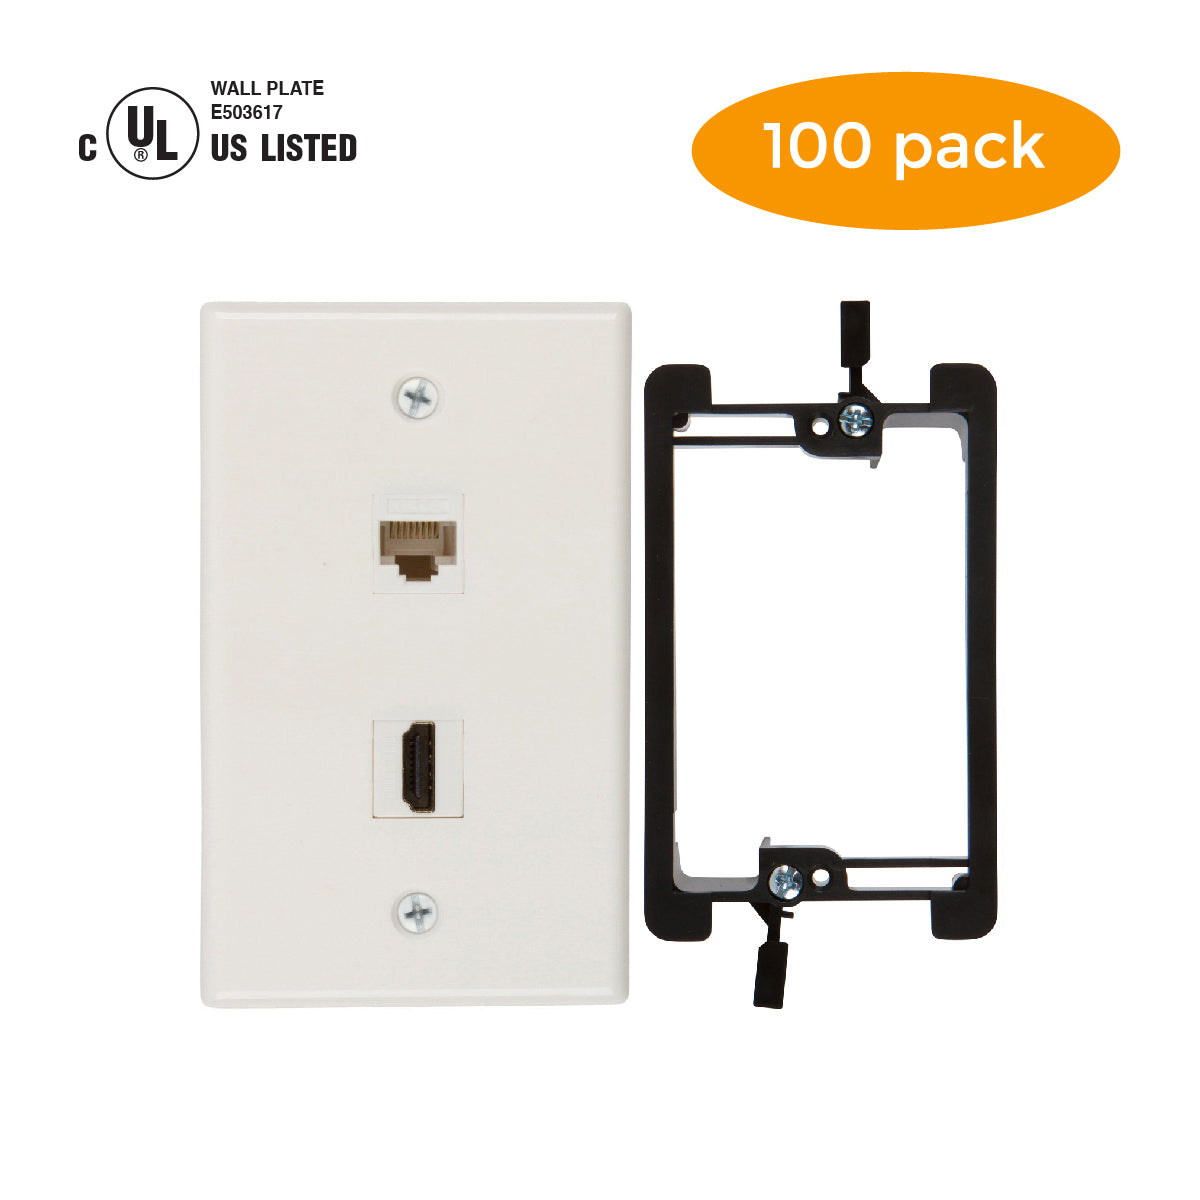 HDMI and Cat6 Ethernet RJ45 Wall Plate [UL Listed], with Single Gang Low Voltage Mounting Bracket Device (White Kit) - Milena International Inc